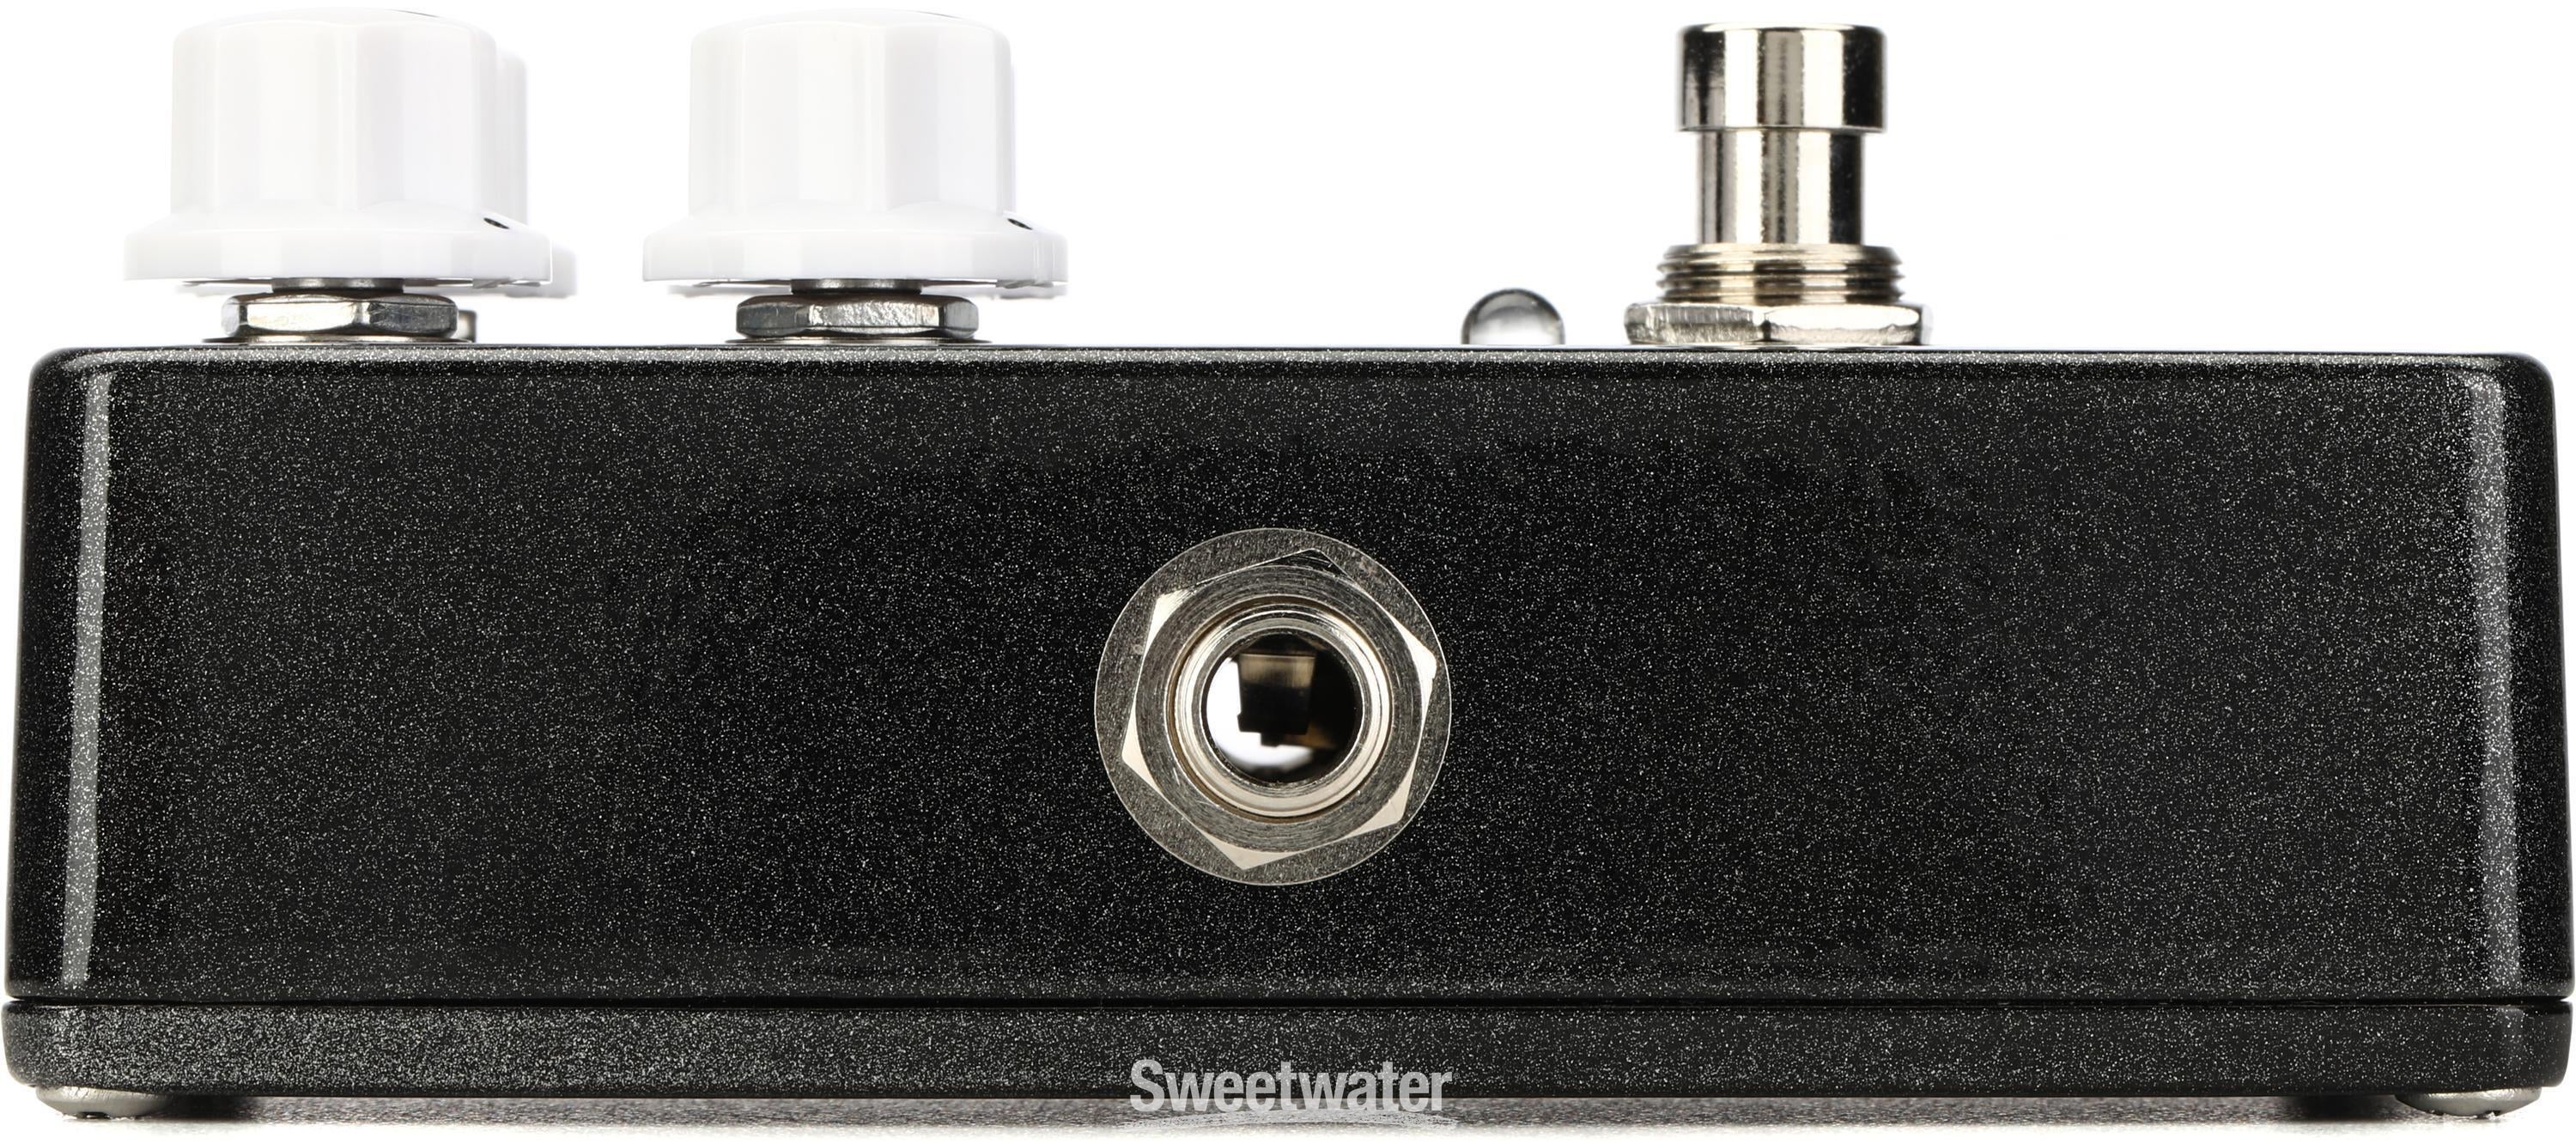 Xotic Bass BB V1.5 Preamp Pedal | Sweetwater